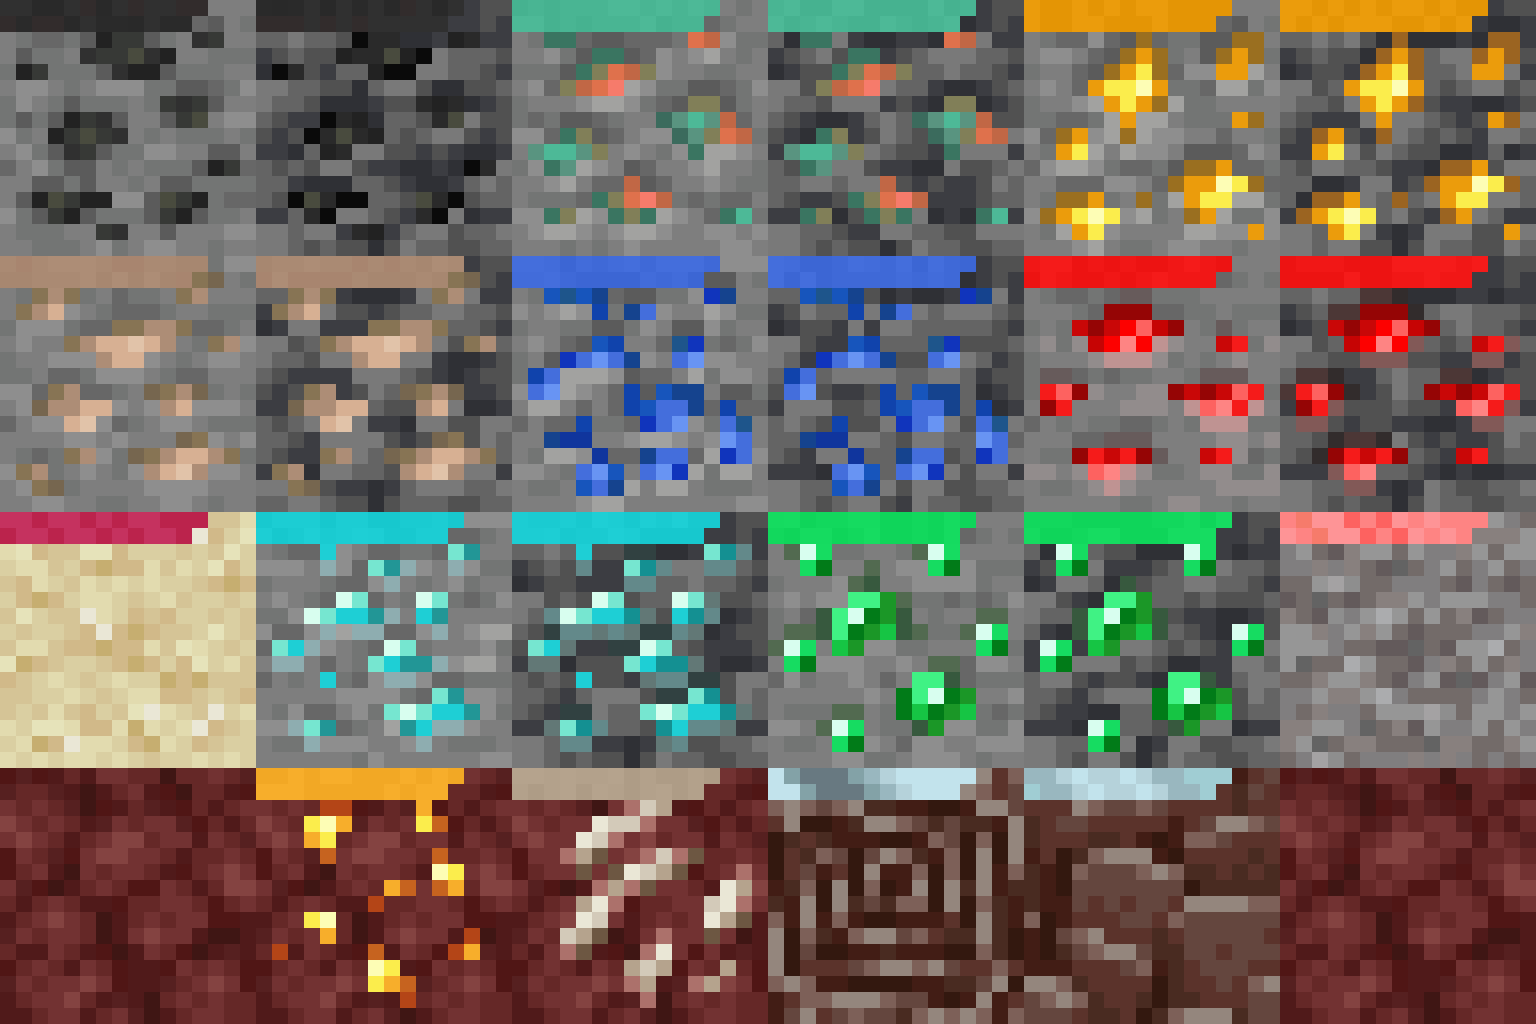 Note: The inside of some ores change colours.  This does not happen in-game and is just an artefact of the GIF.